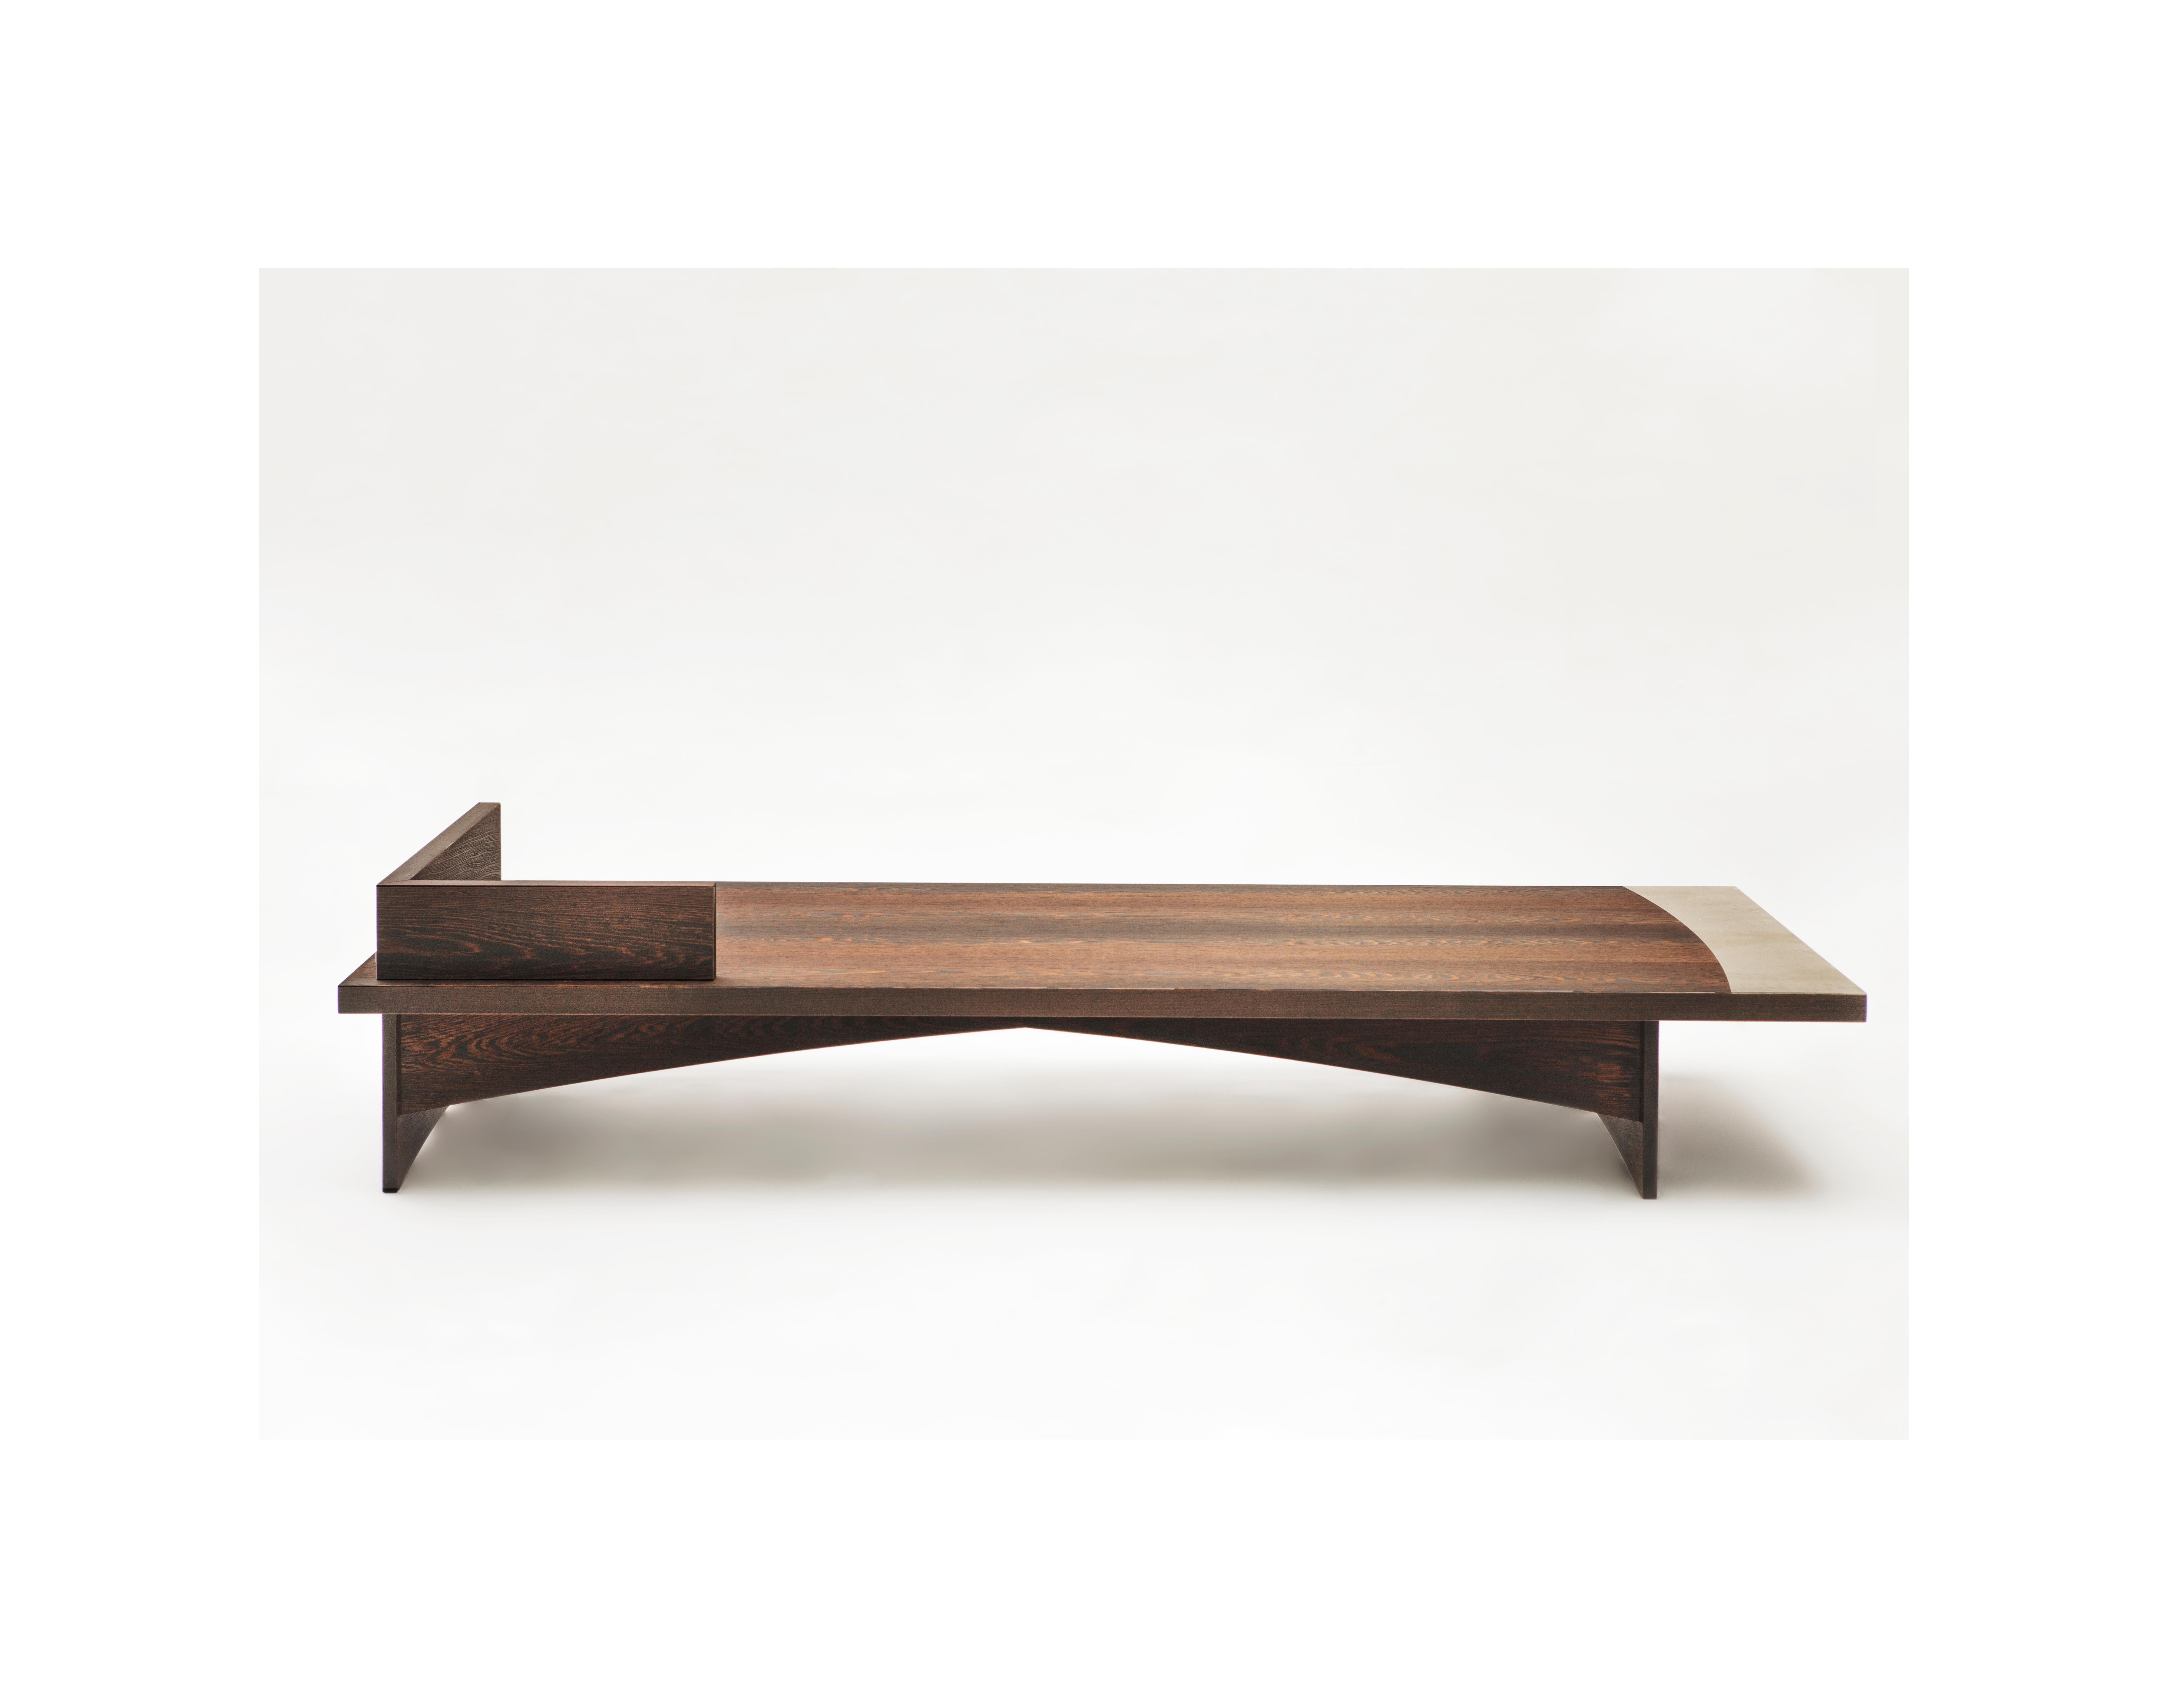 A Branda (typical Italian term describing a simple essential bed) is a simple and sophisticated piece of furniture, unique thanks to its details, geometrical shapes, and acquired wenge wooden profiles with an insert in cement. 
The beauty of the